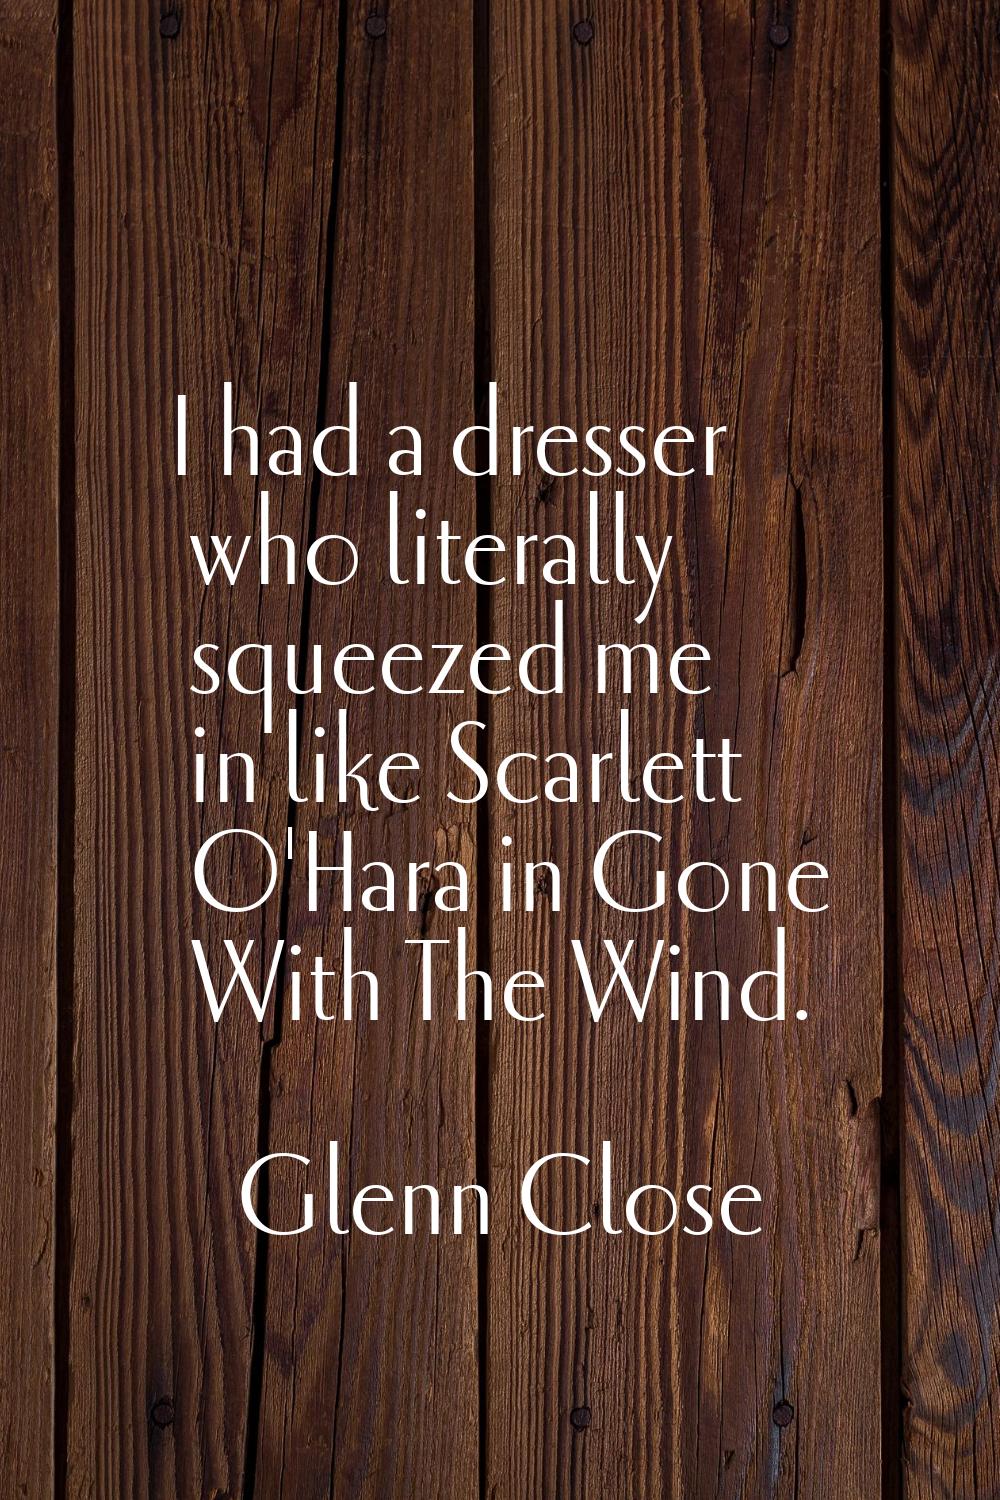 I had a dresser who literally squeezed me in like Scarlett O'Hara in Gone With The Wind.